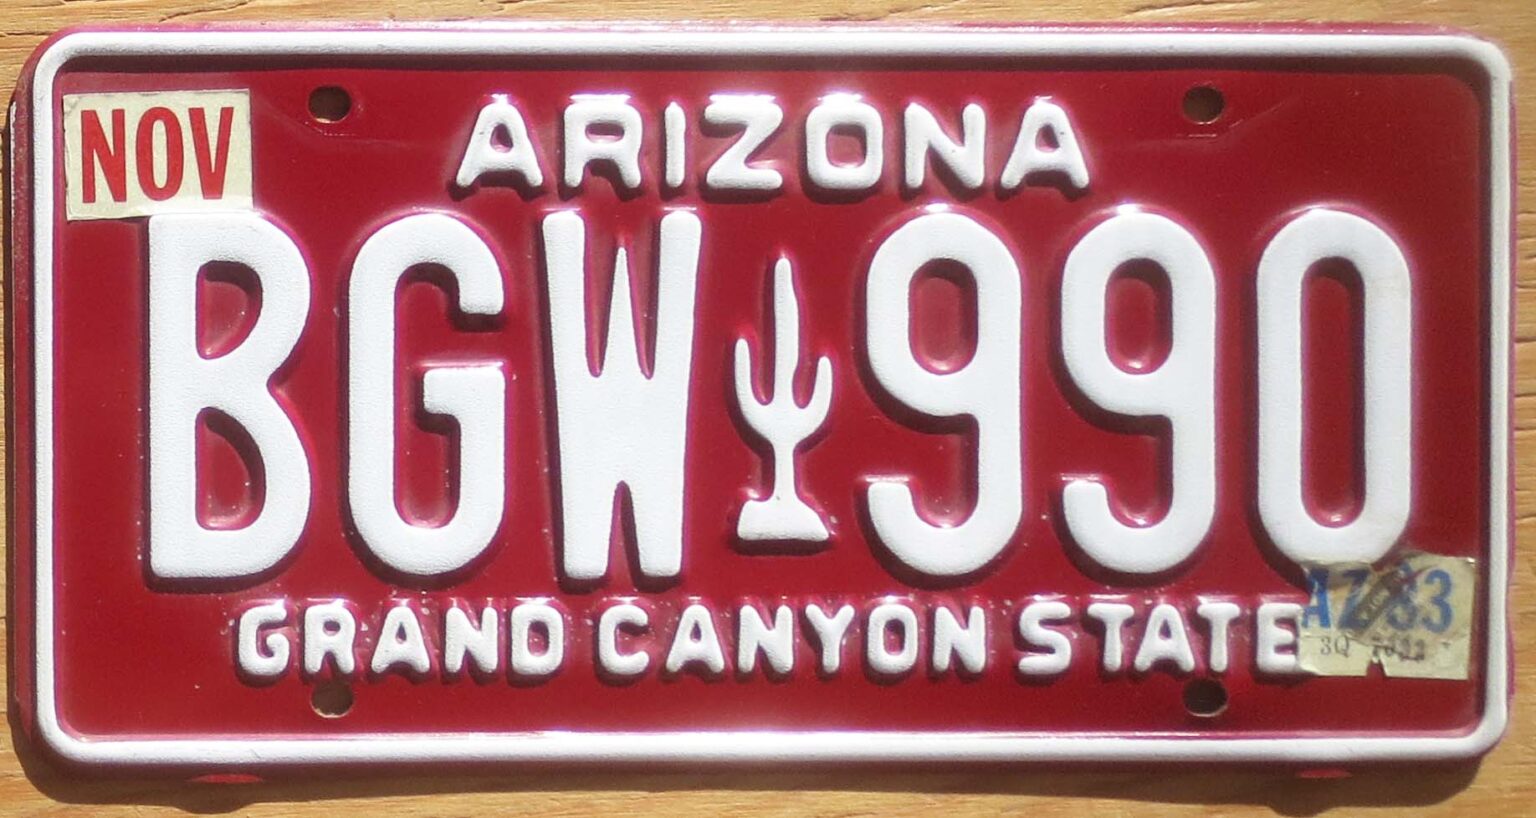 Arizona Product categories Automobile License Plate Store